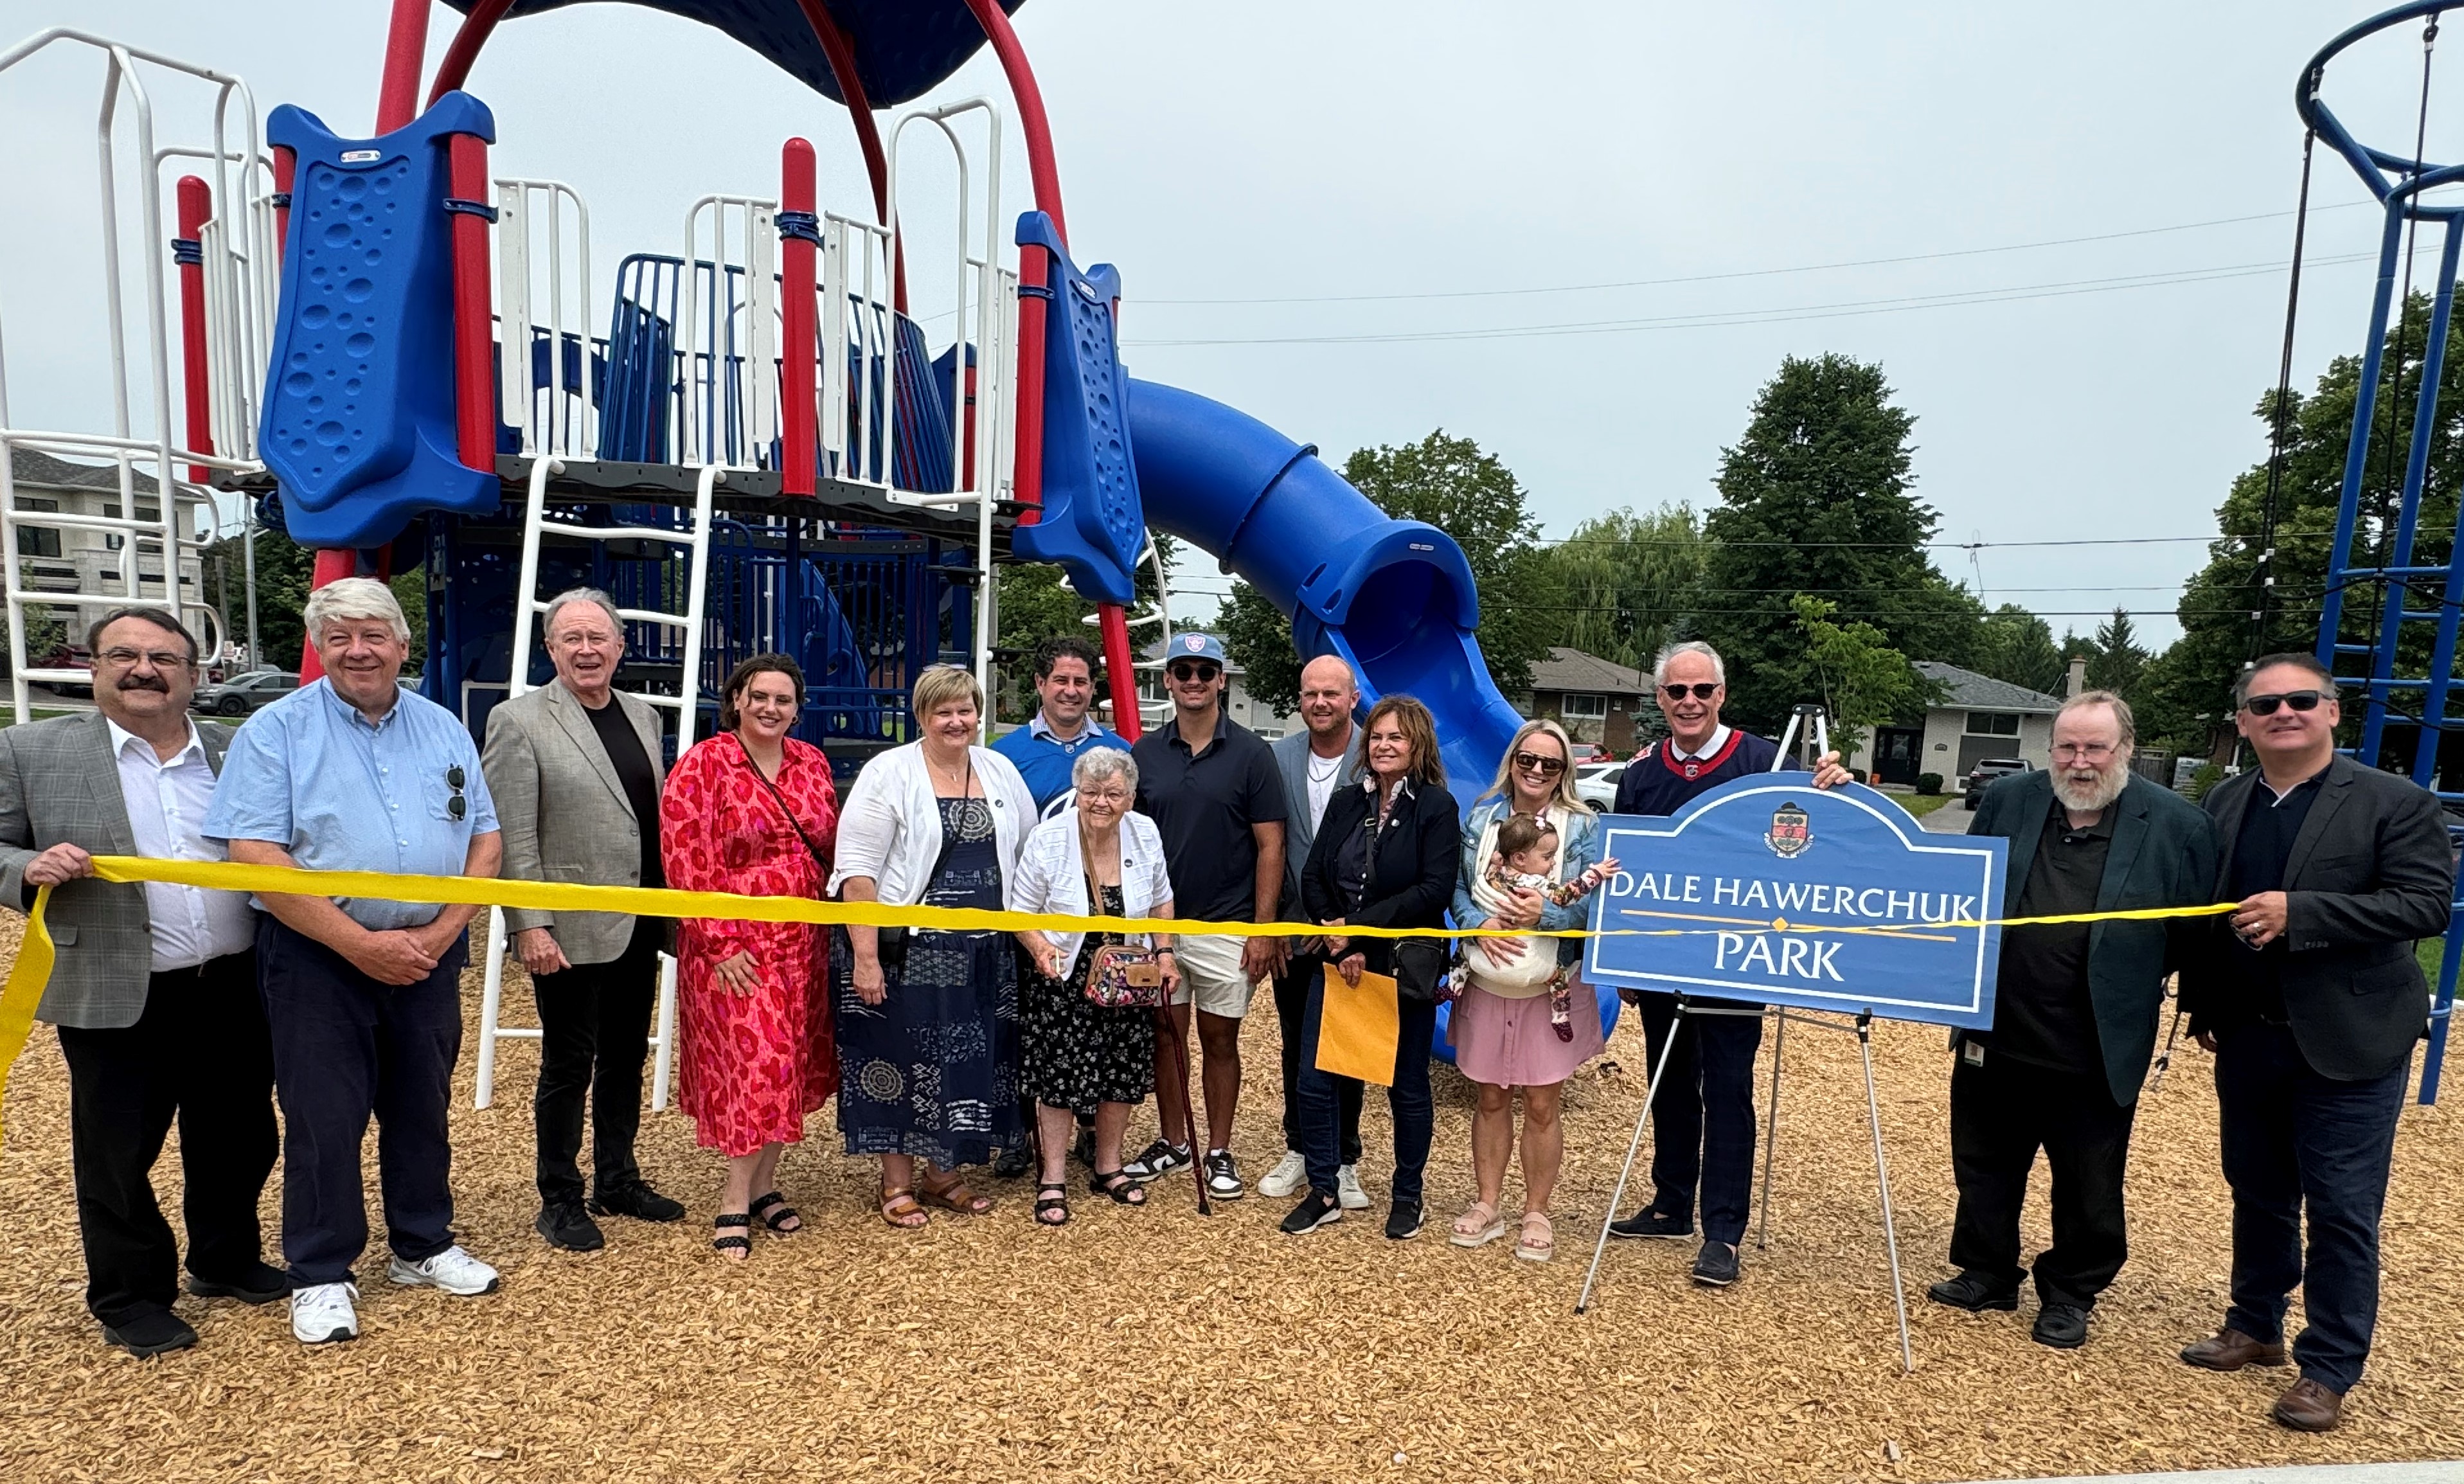 Members of Oshawa Council were joined by family of the late Dale Hawerchuk to celebrate the official opening of Dale Hawerchuk Park situated in the new Symphony Towns development on Harmony Road South, the former site of Donevan High School.